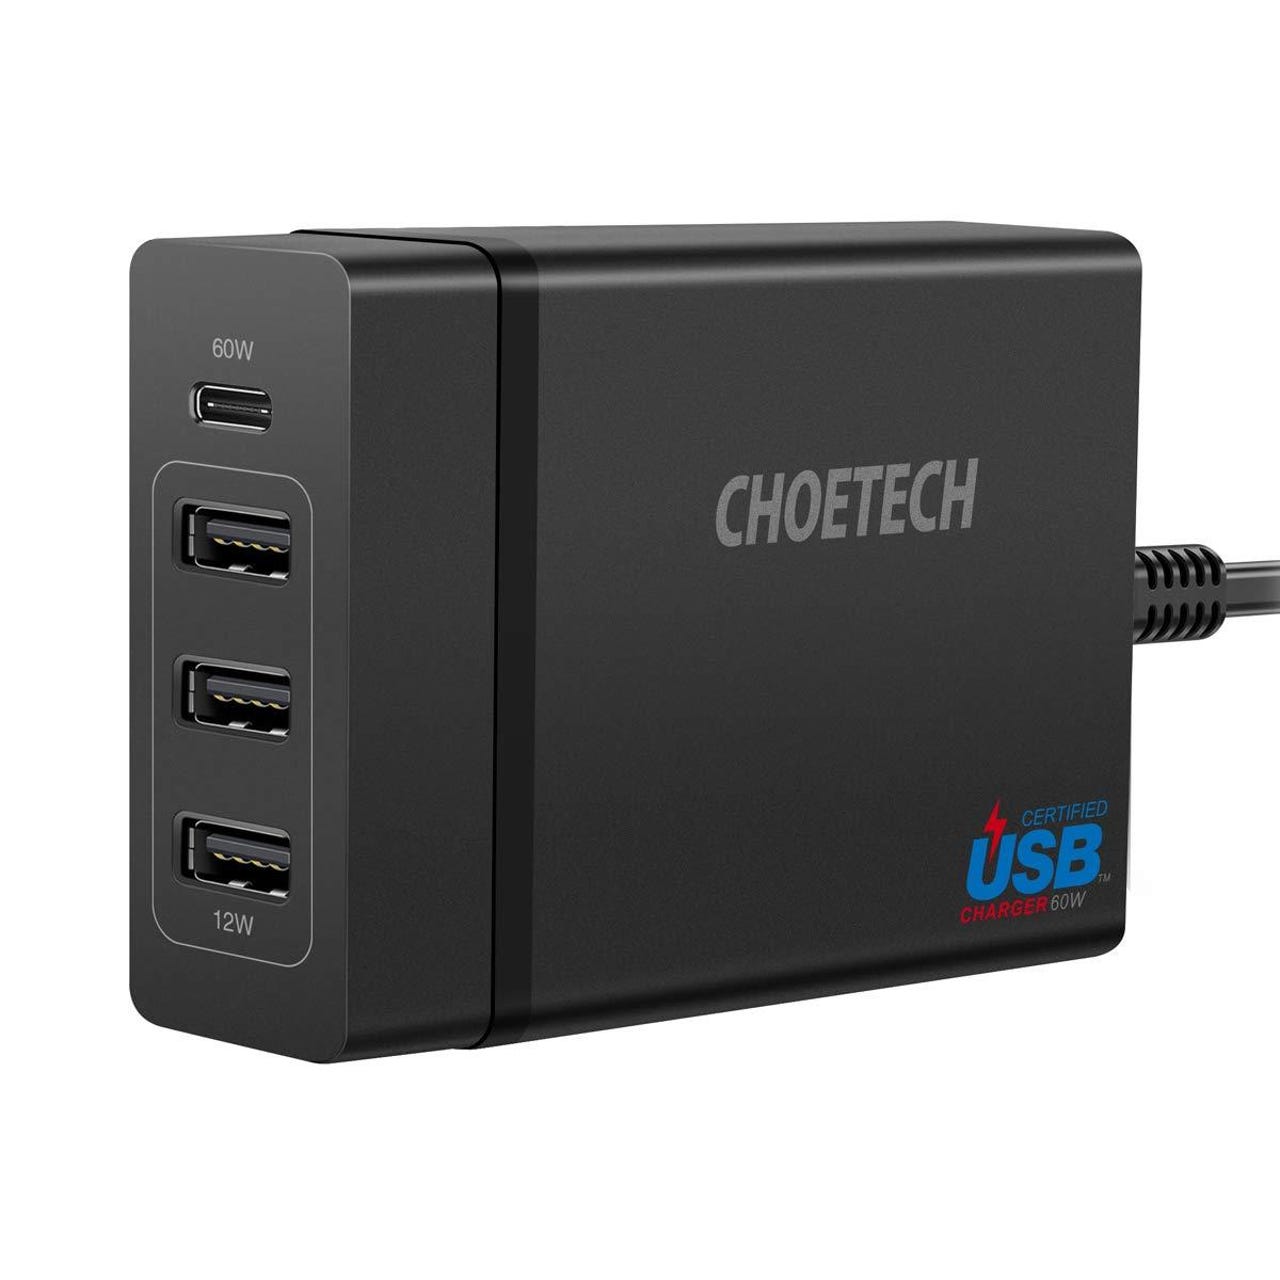 CHOETECH 72W USB Type C Wall Charger, USB-IF Certified 4 Ports with 60W Power Delivery